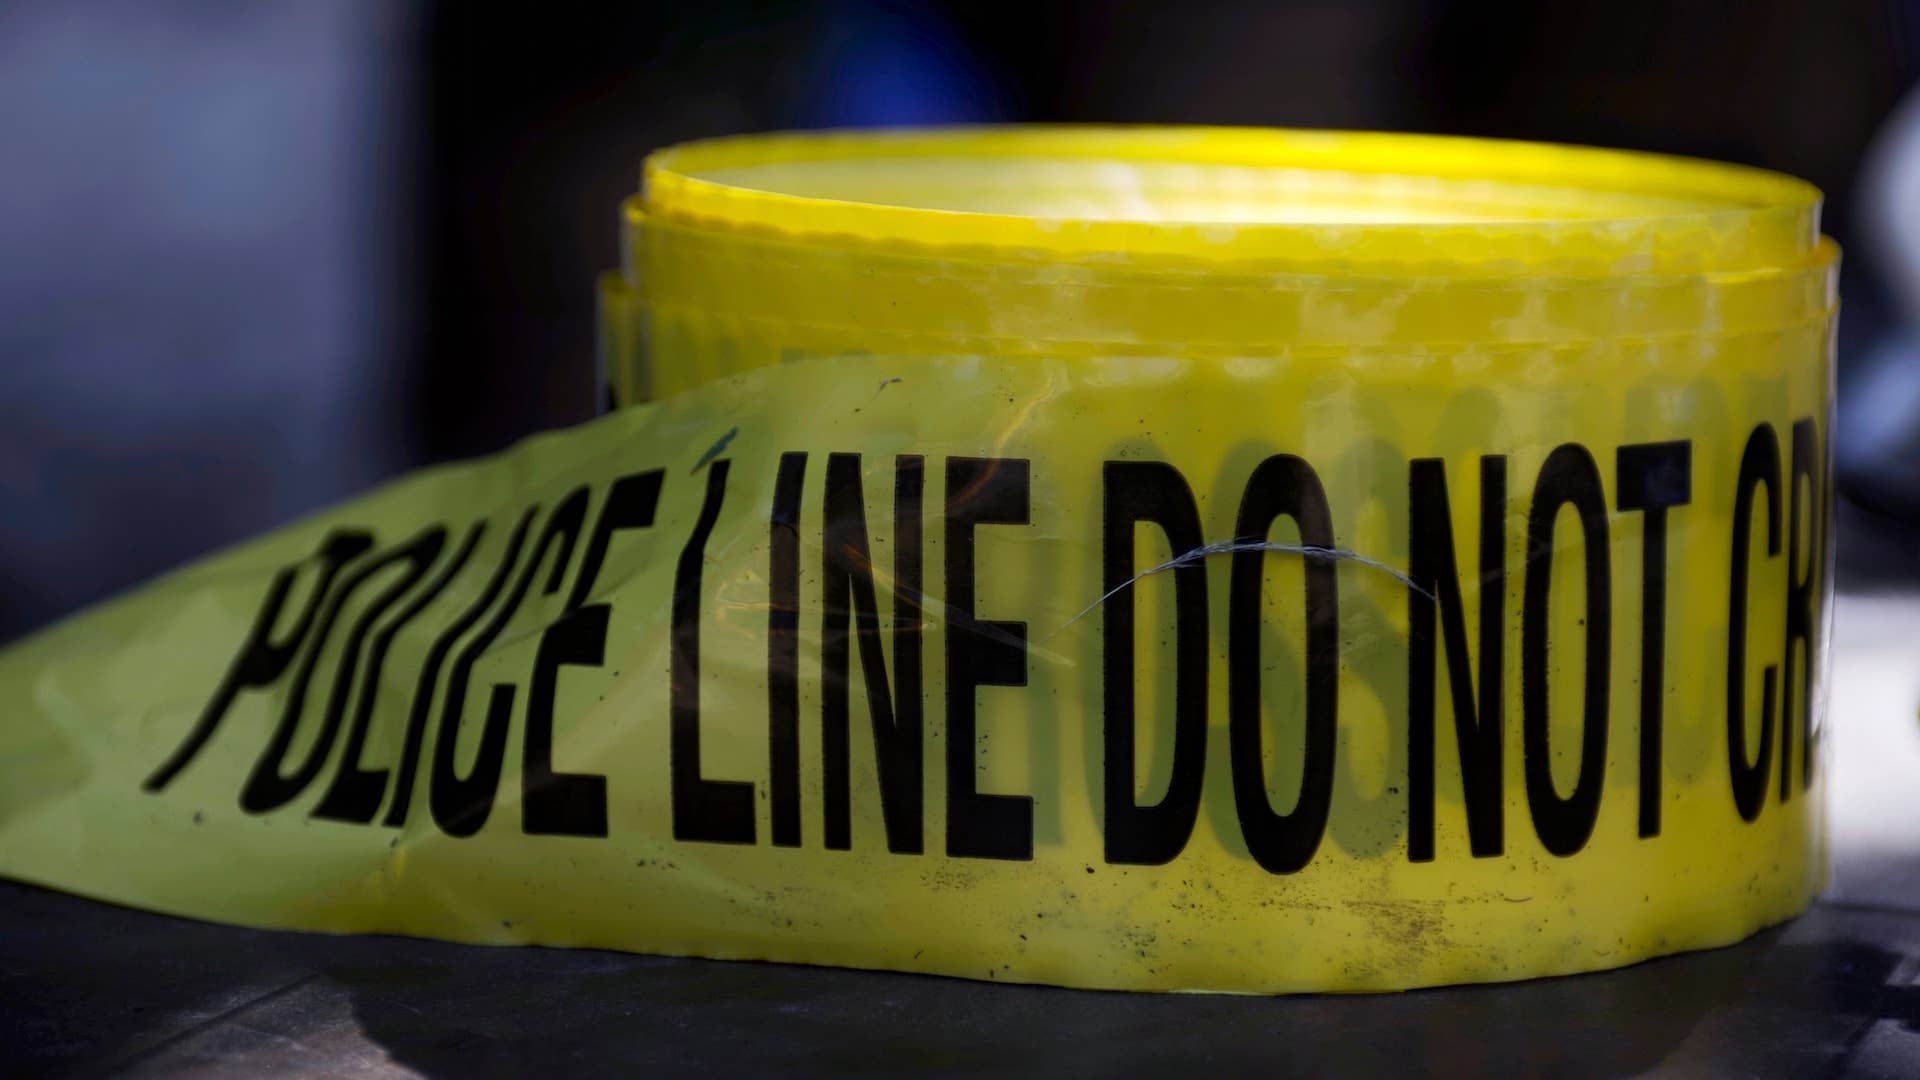 Roll of crime scene tape is unused as police officers interact with youth